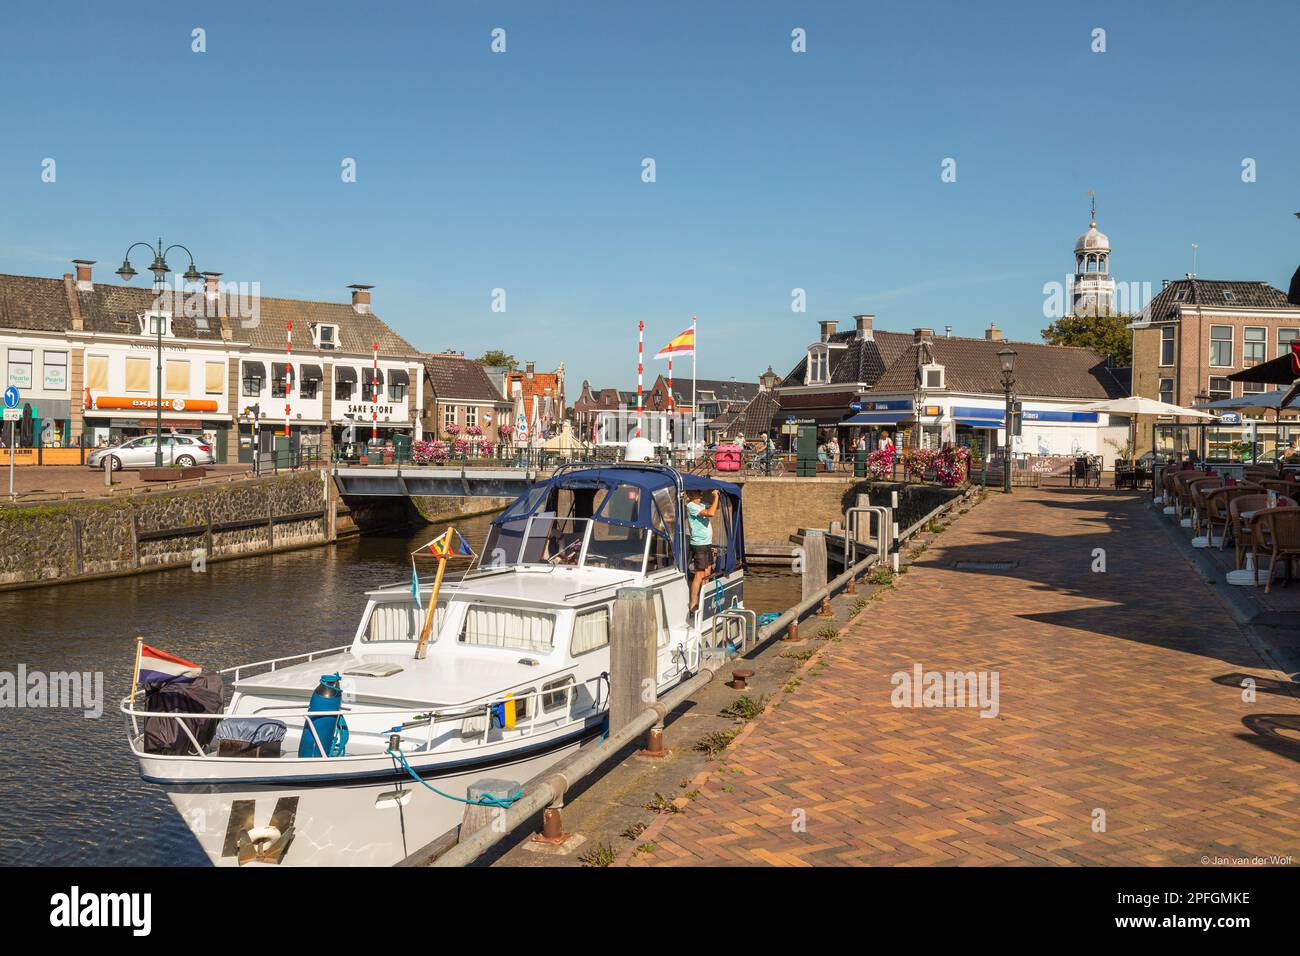 Cozy Frisian town of Lemmer in the Netherlands. Stock Photo